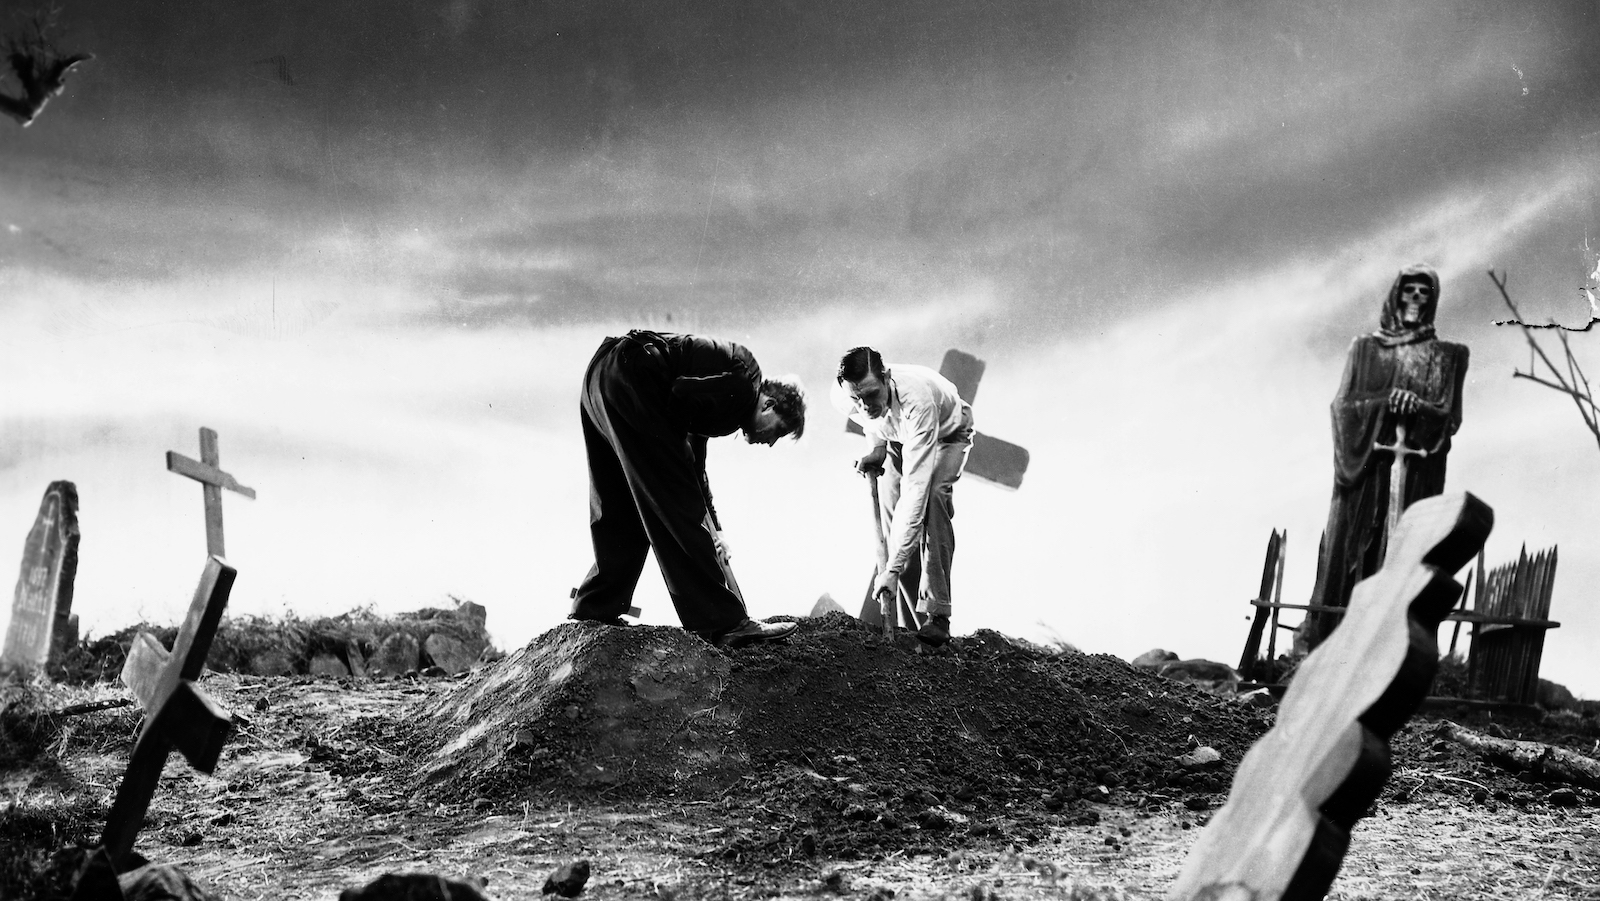 Two men dig up a grave on an early morning hillside